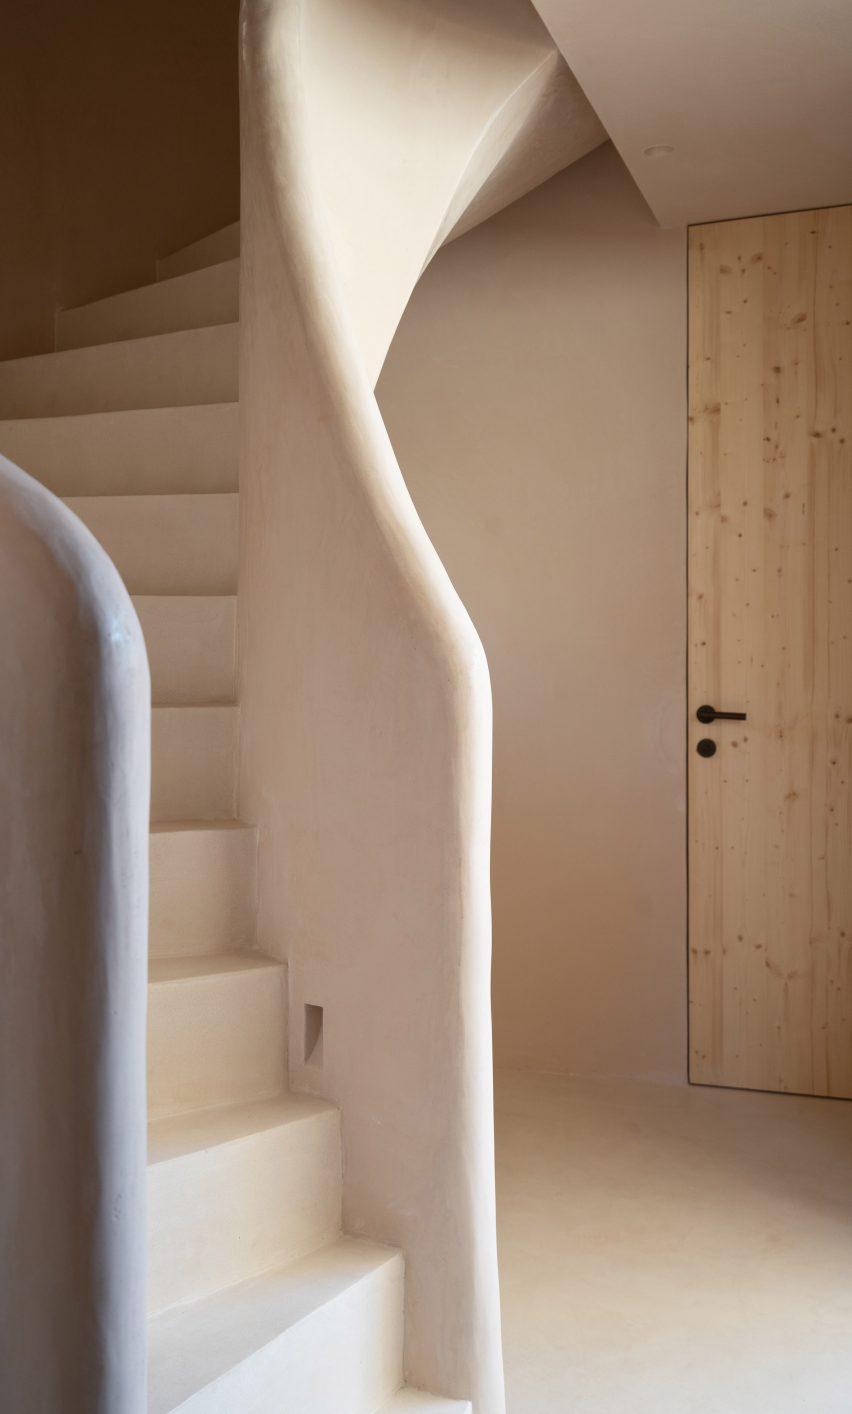 Photo of a staircase at the home